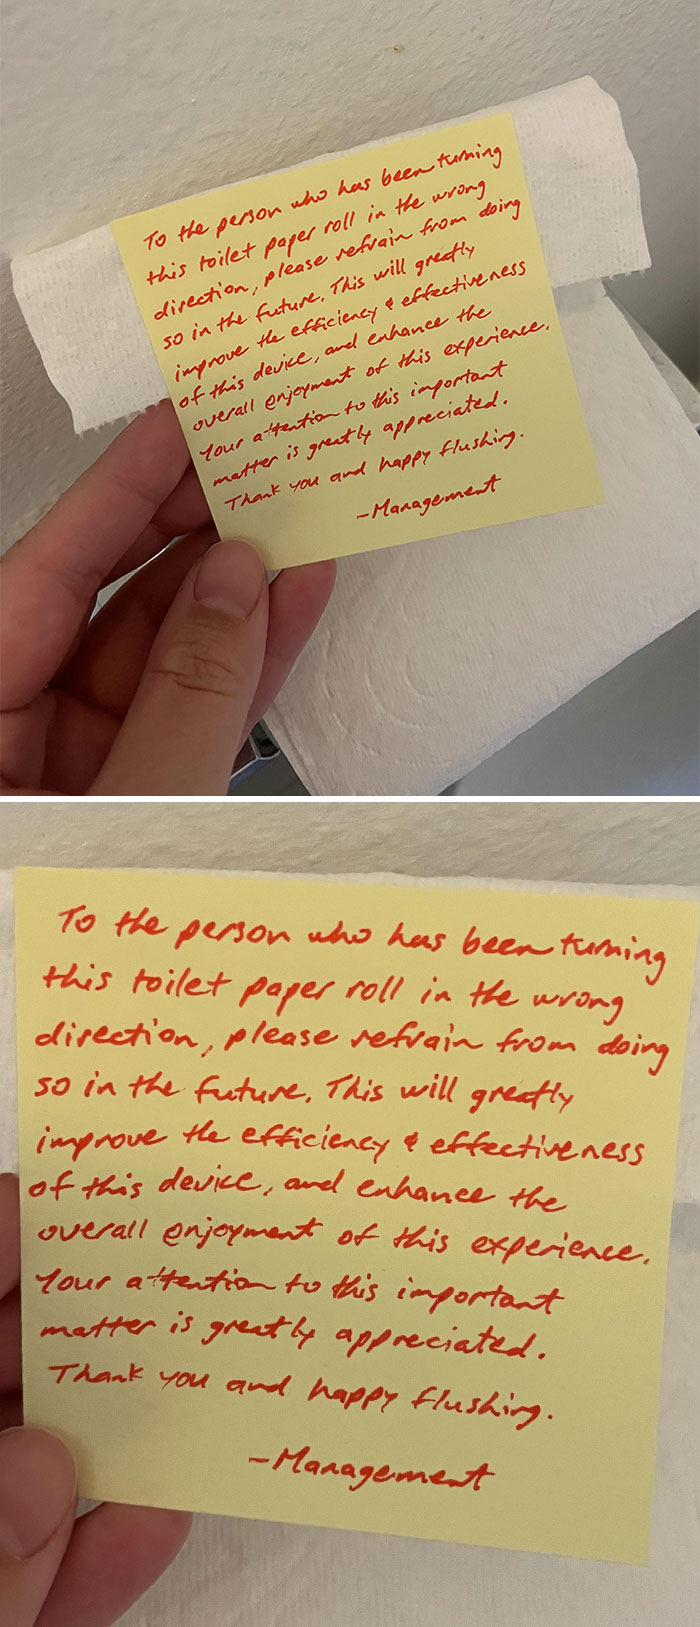 I Troll My Husband By Turning The Toilet Paper Roll In The Direction He Hates. This Is The Note He Left Me